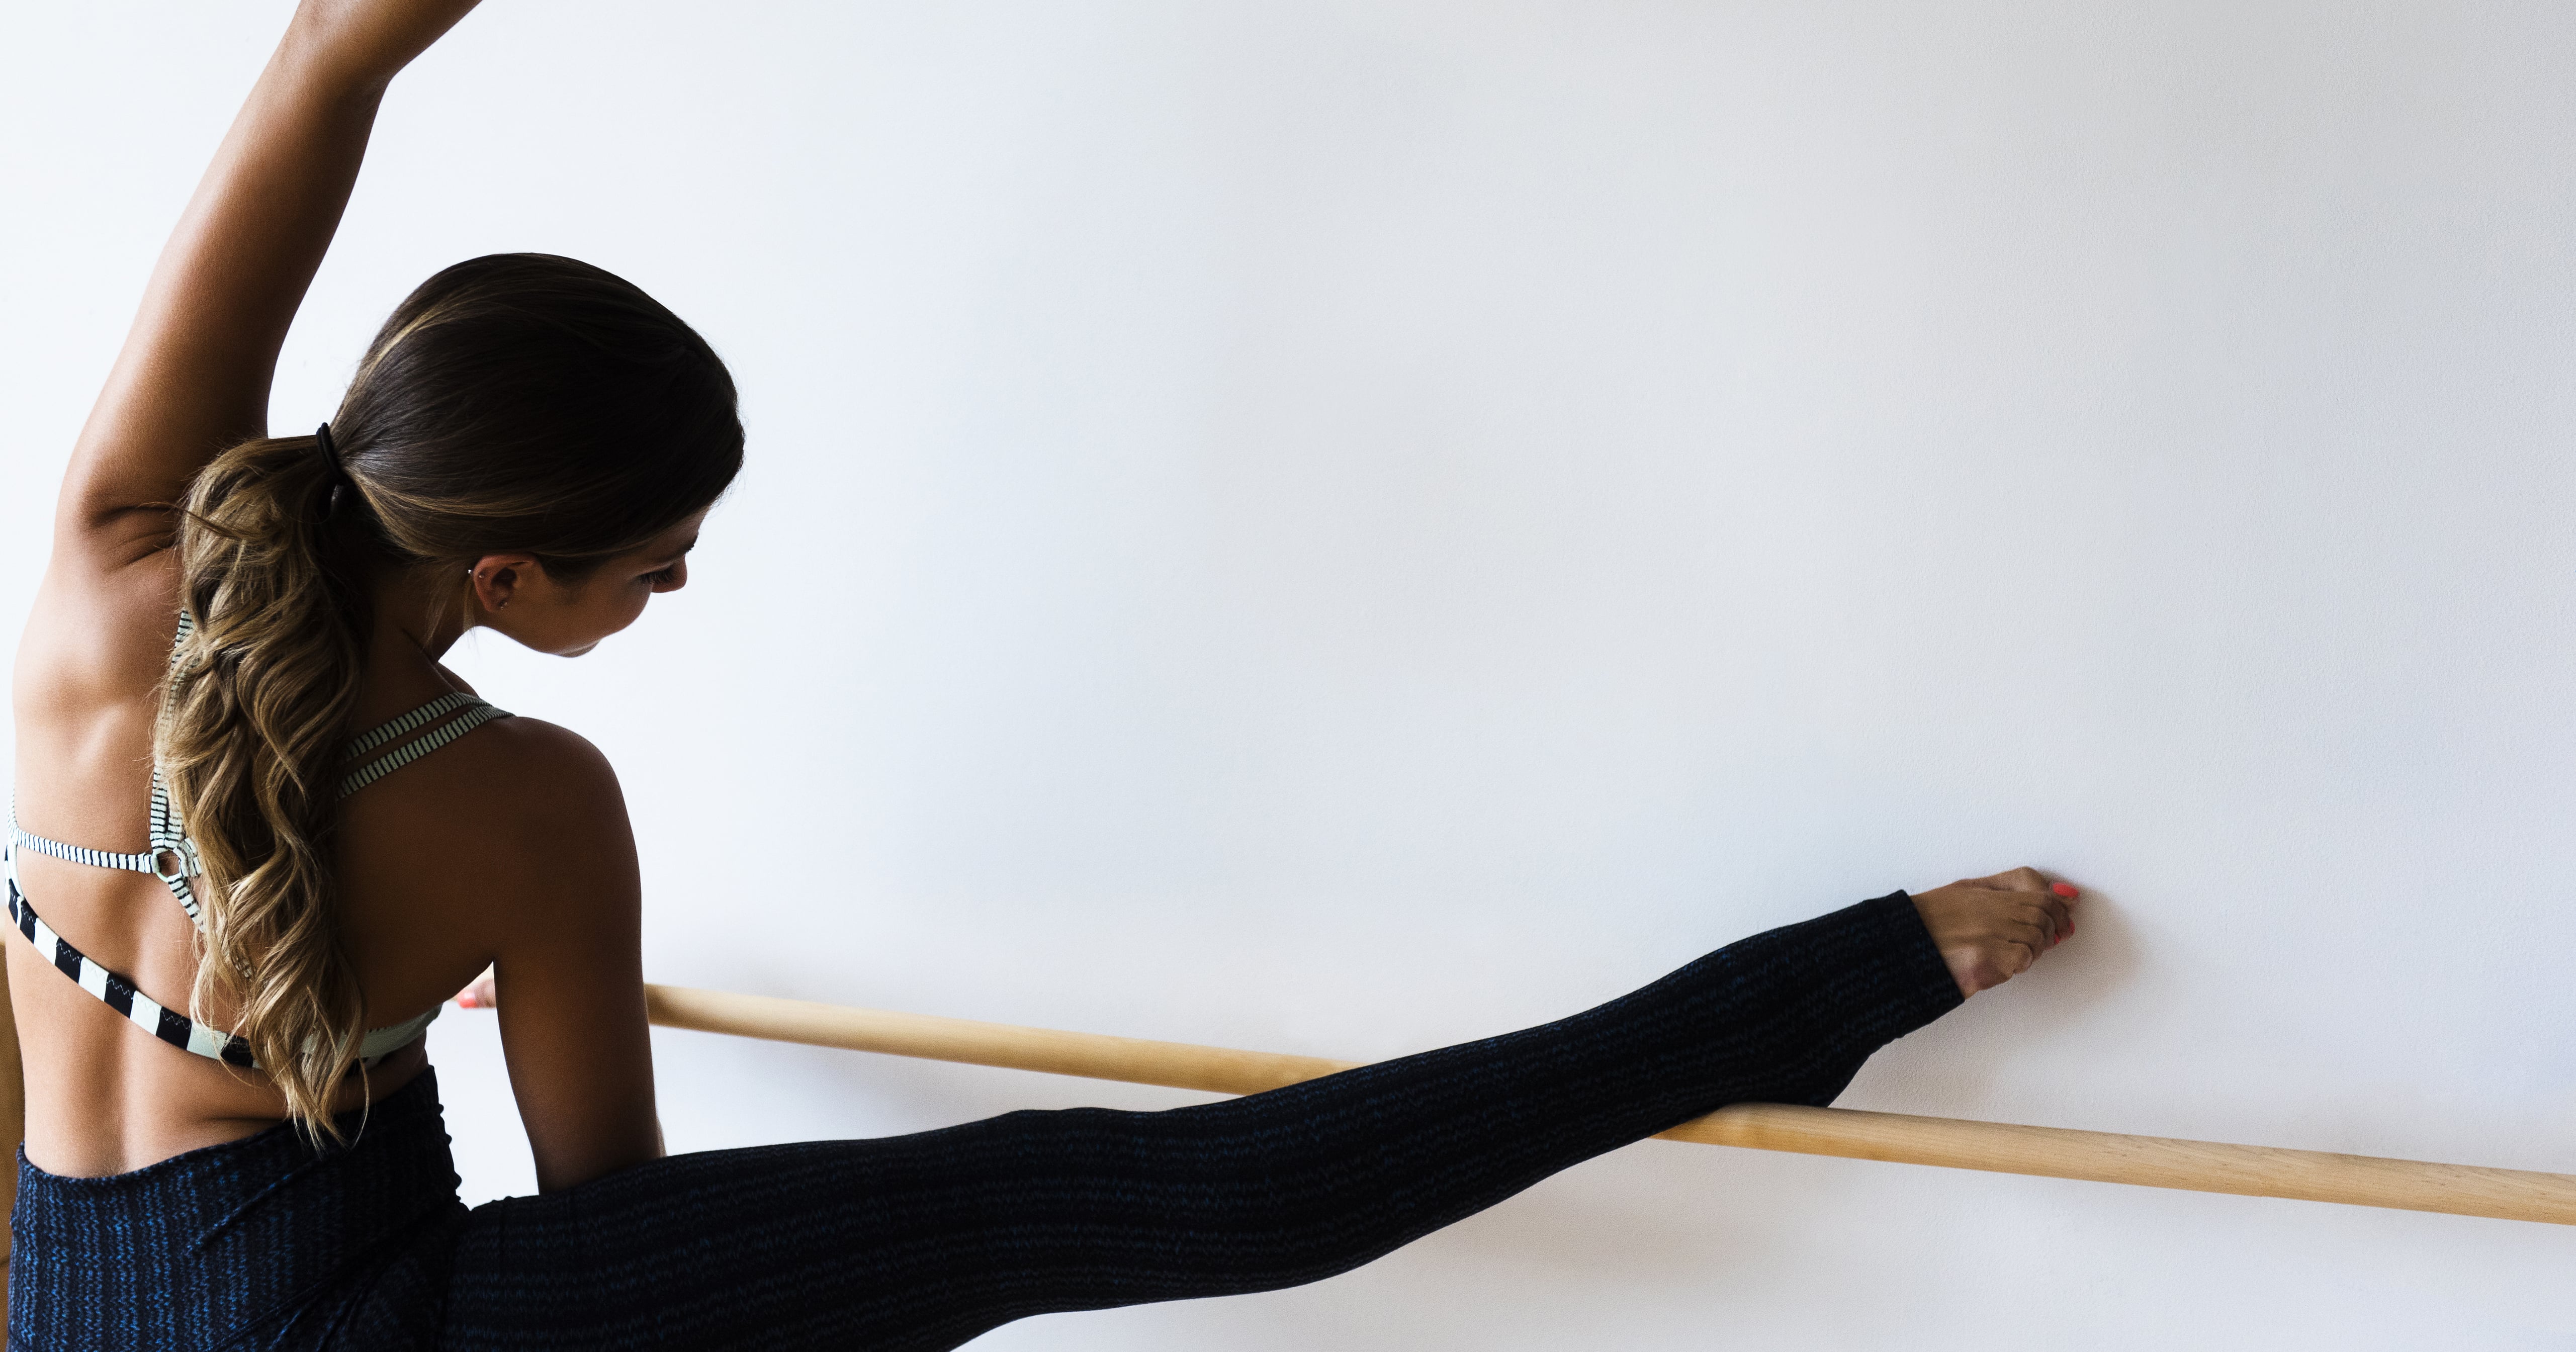 Barre workouts give a unique challenge for both mind and body